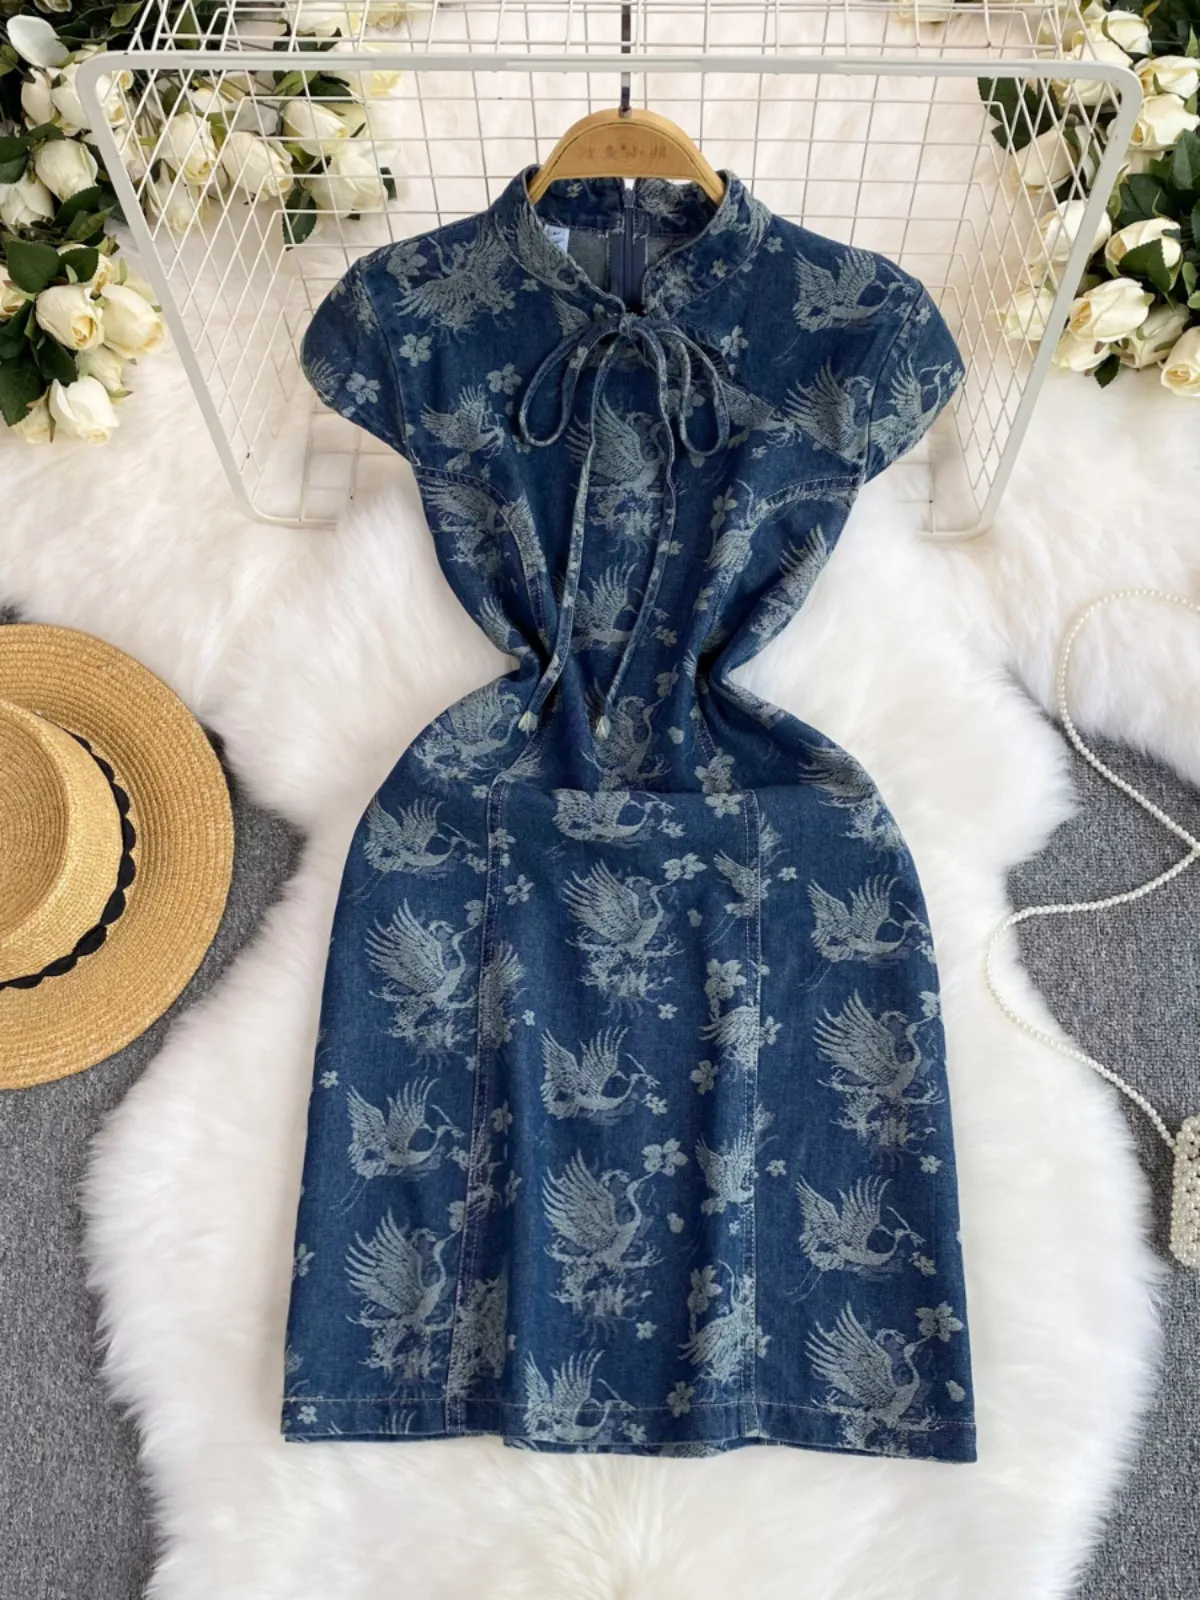 New Chinese style Chinese style dressing dress for women's fashion retro printed button up tie up slim fit buttocks wrapped denim cheongsam skirt